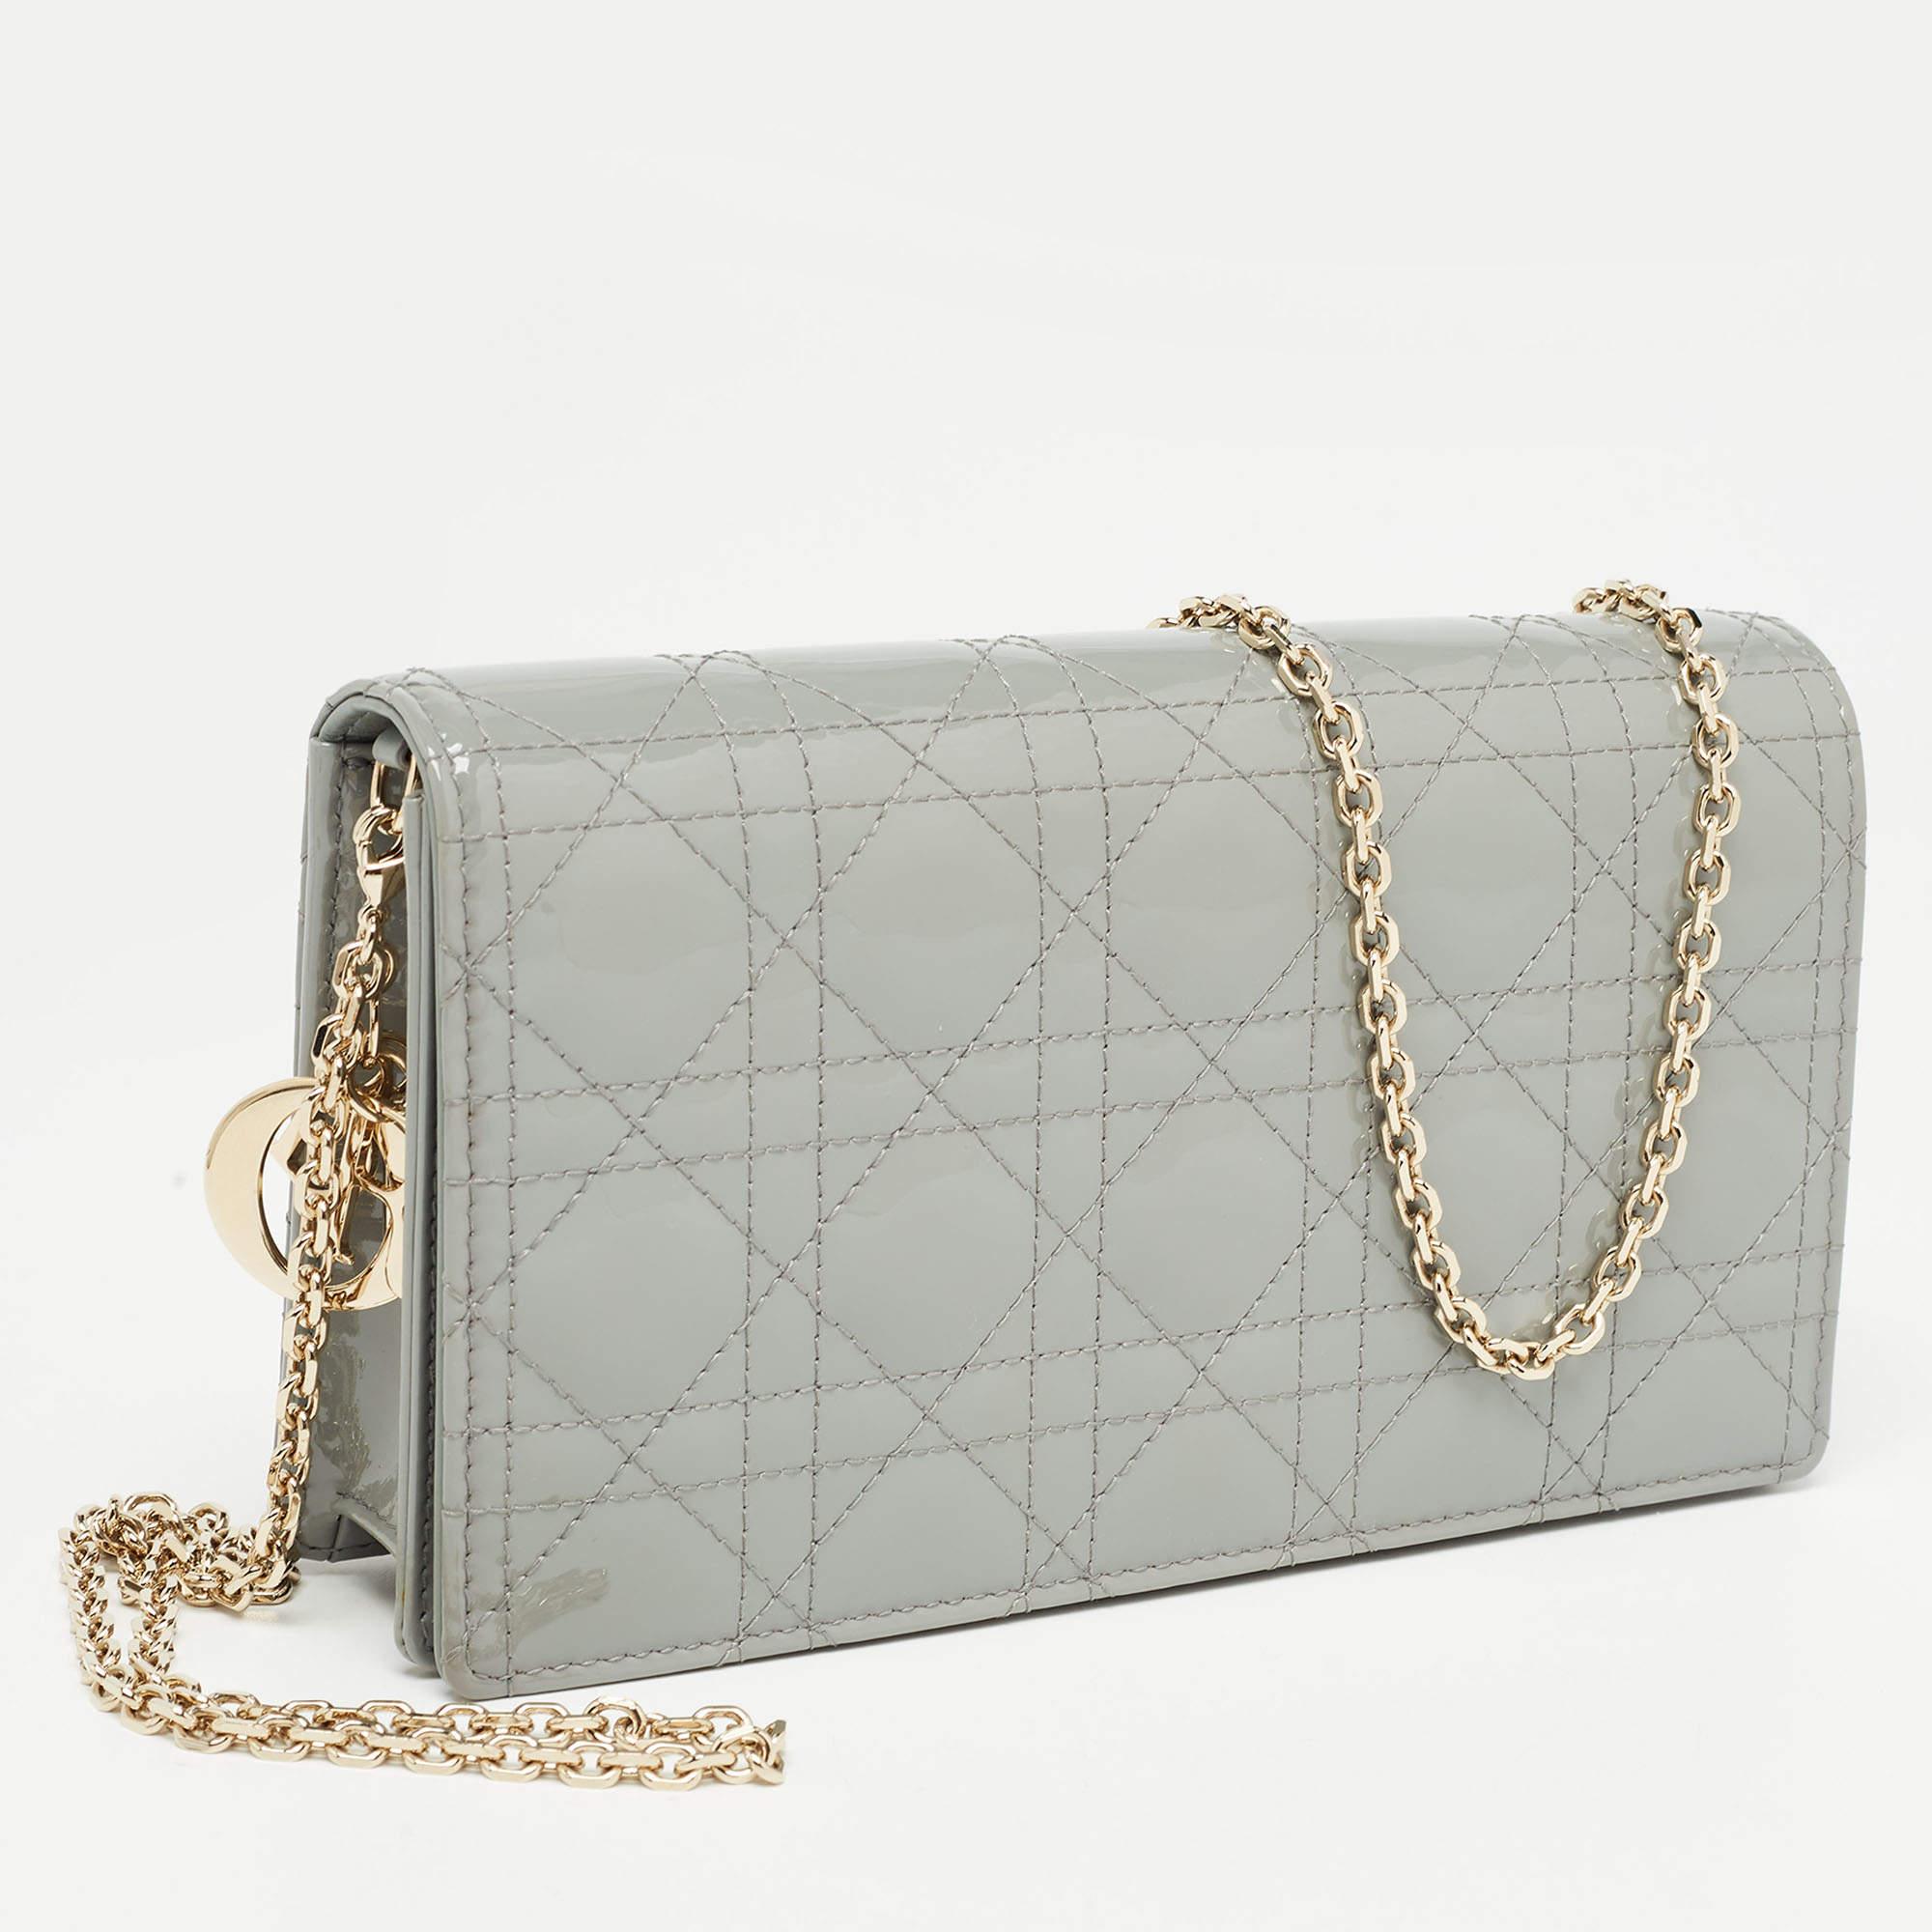 Due to detailed and innovative designs, Dior has managed to be at the top of fashion's hierarchy through the years. Infuse the signature aesthetics of the brand into your outfit by accessorizing it with this Lady Dior pouch. With a classic design,